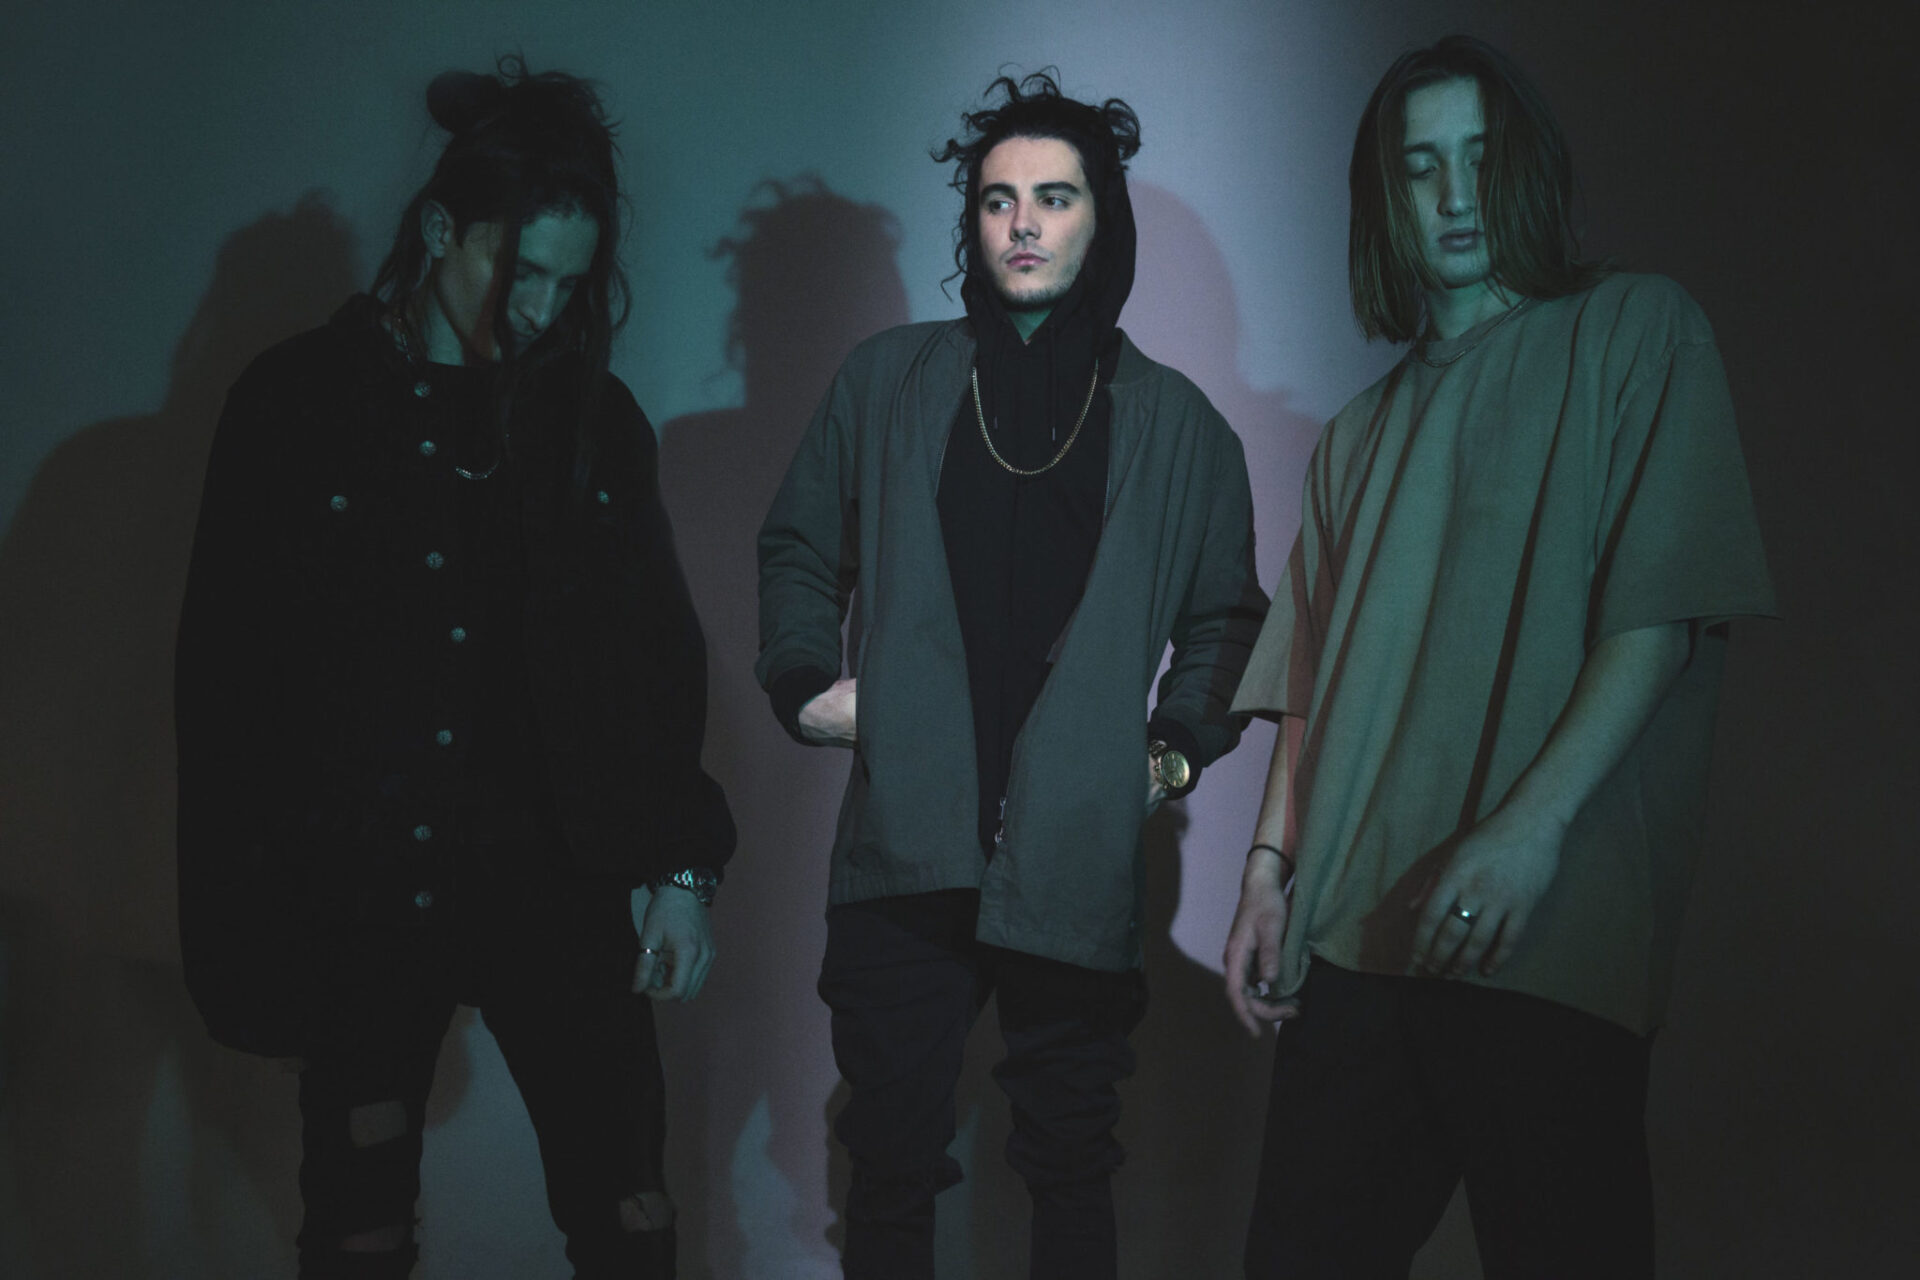 PREMIERE: Chase Atlantic take us to “Church” in new live music video